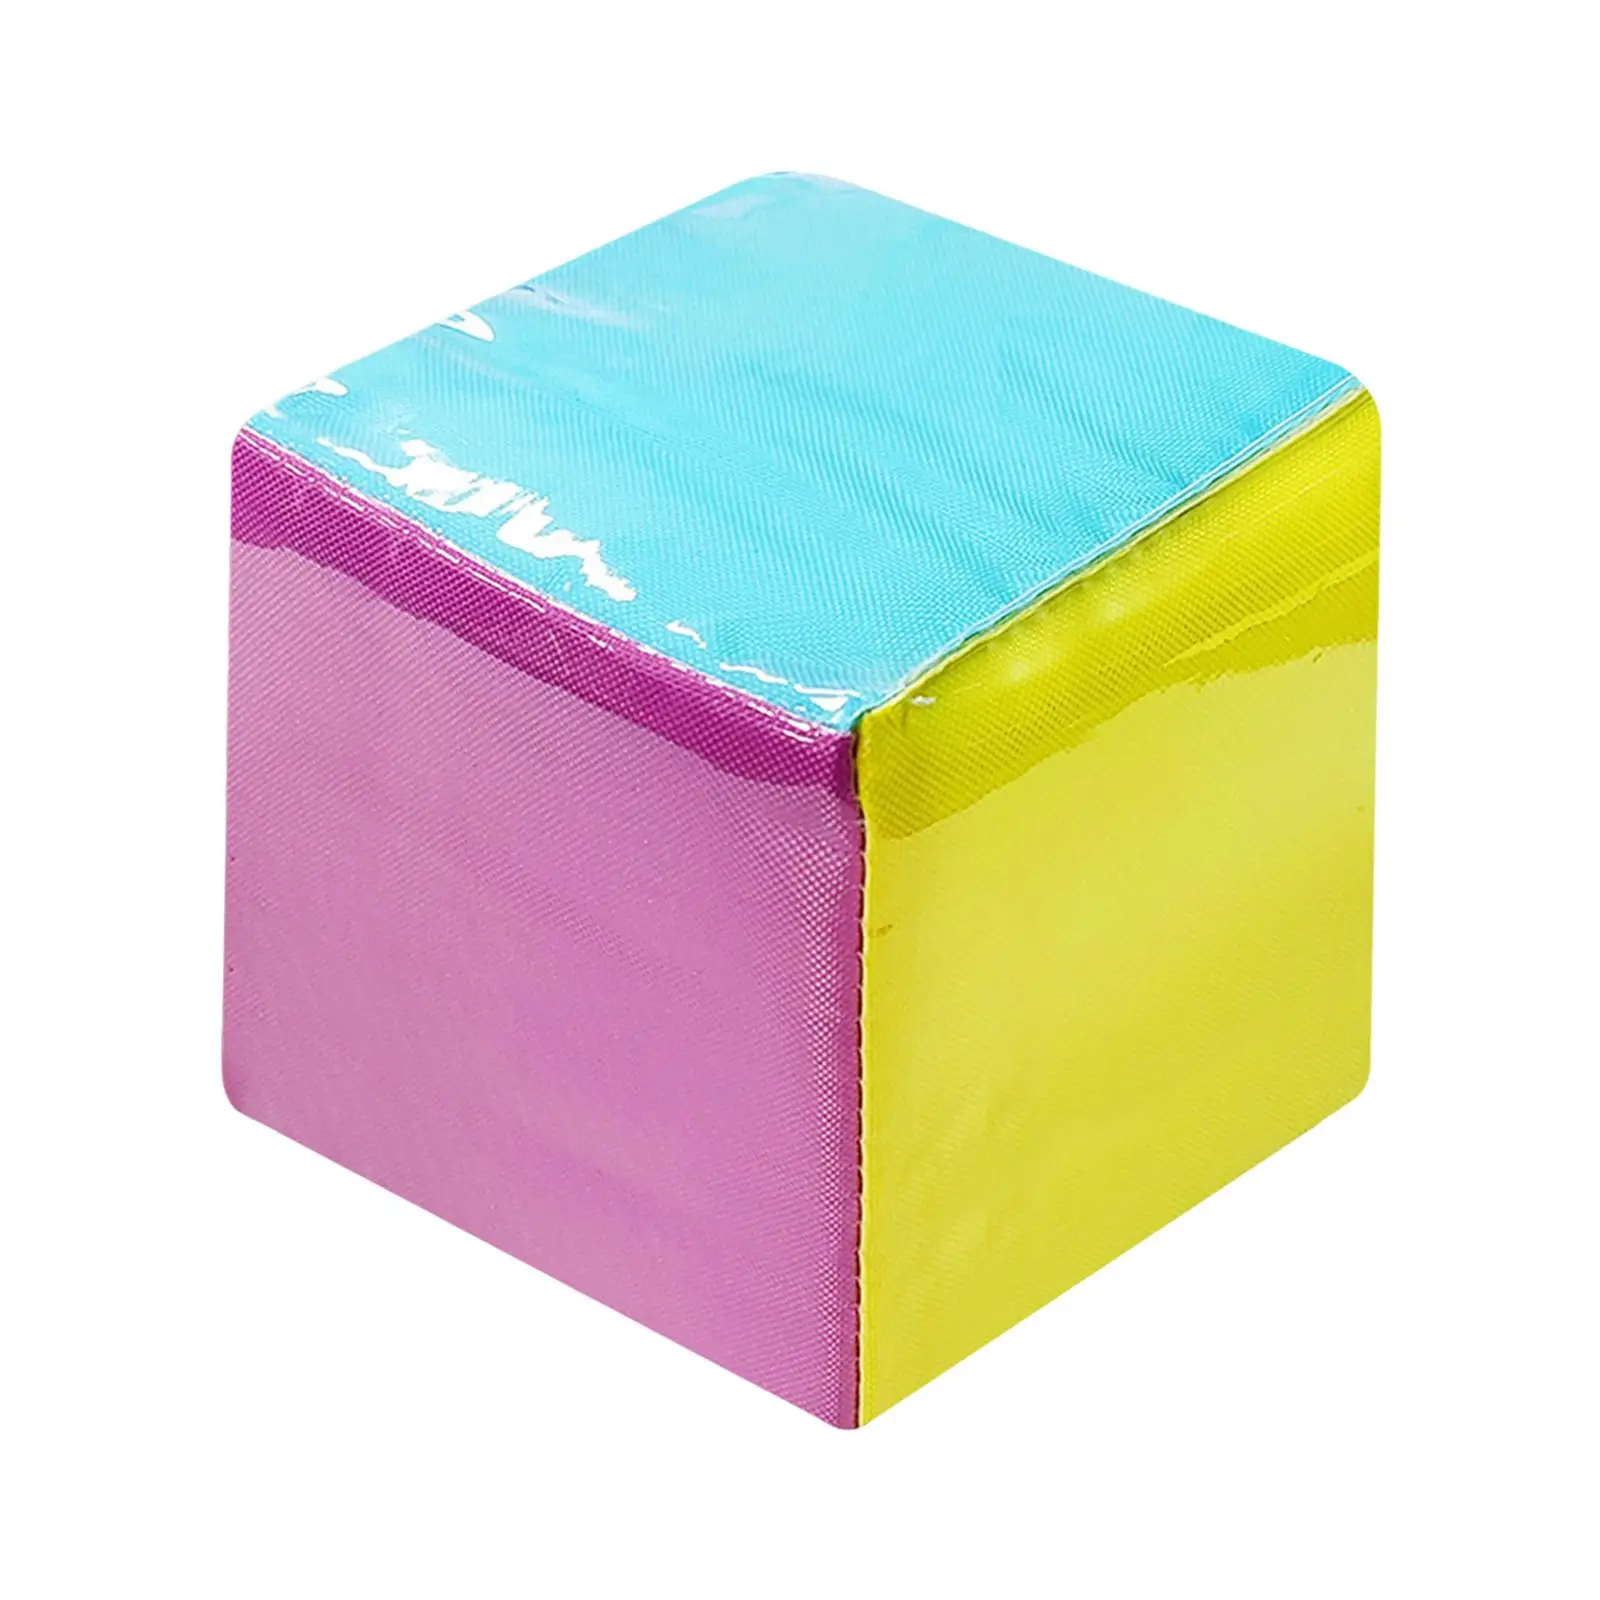 Early Education Learning Cubes Props Education Playing Dice for Teaching Aid Kindergarten Classroom Blocks Toys Preschool